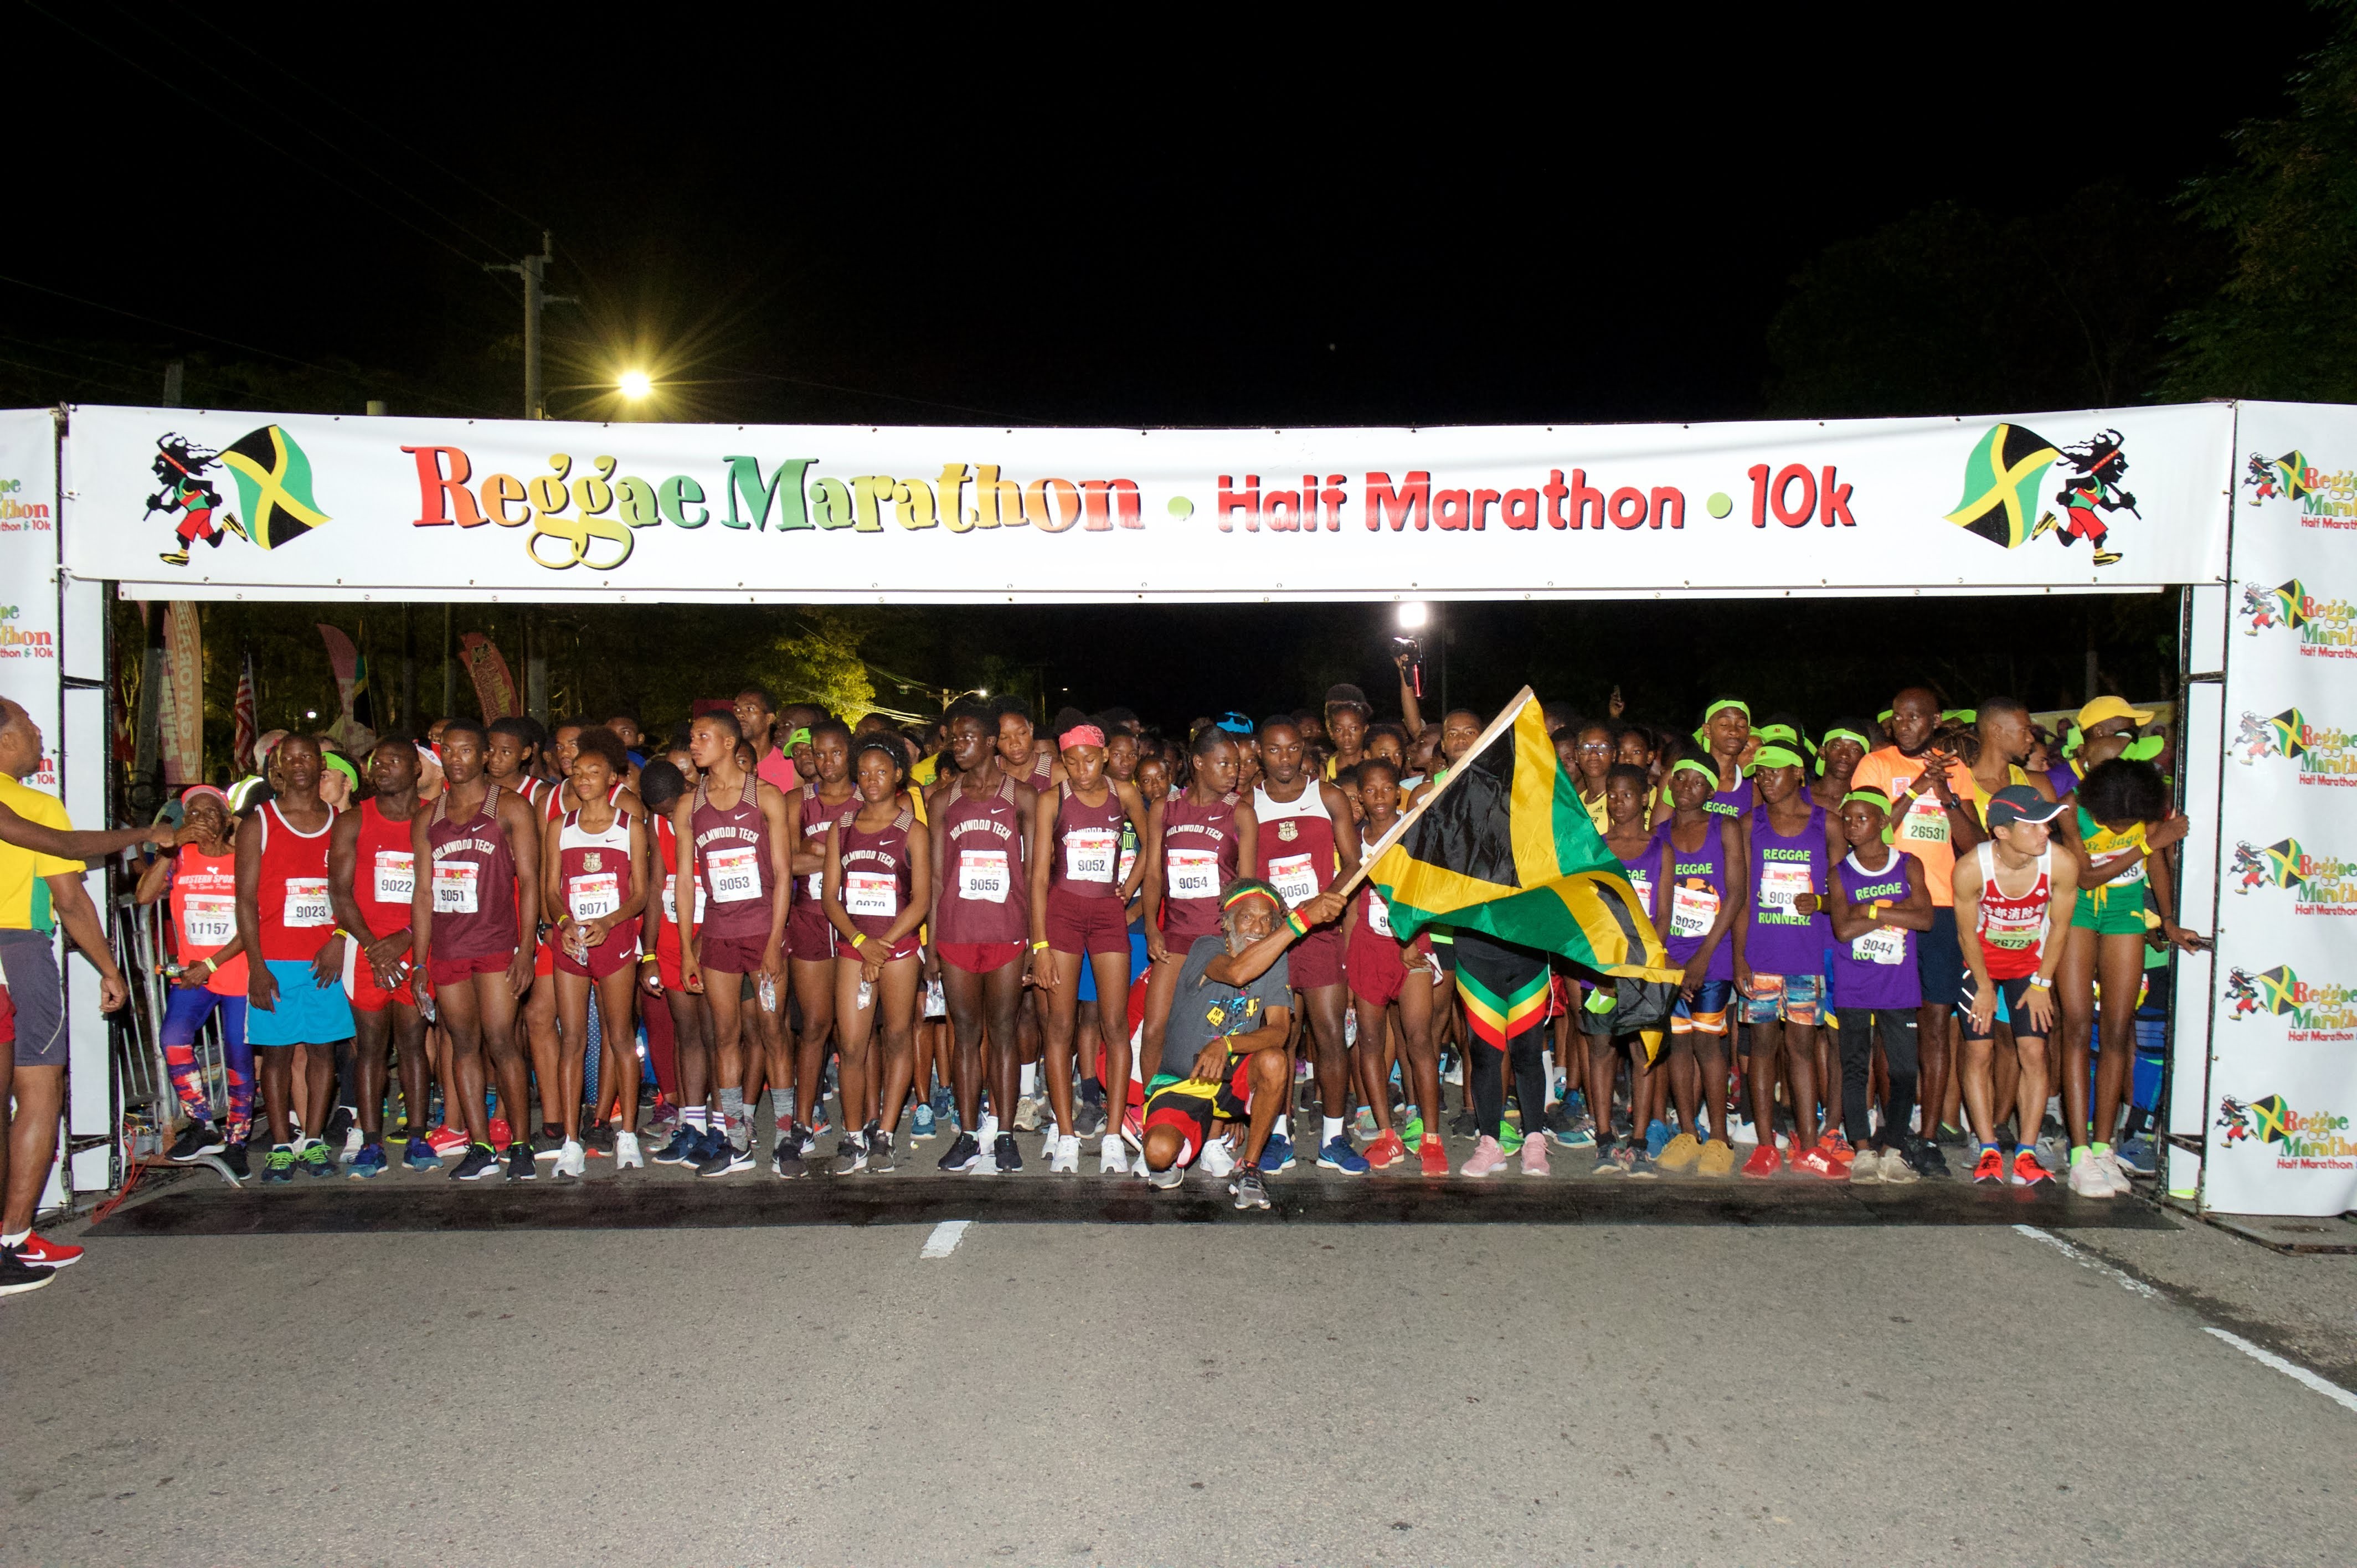 Registration is now open for local and international participants in this yearâ€™s Virtual Reggae Marathon, Half Marathon and 10K